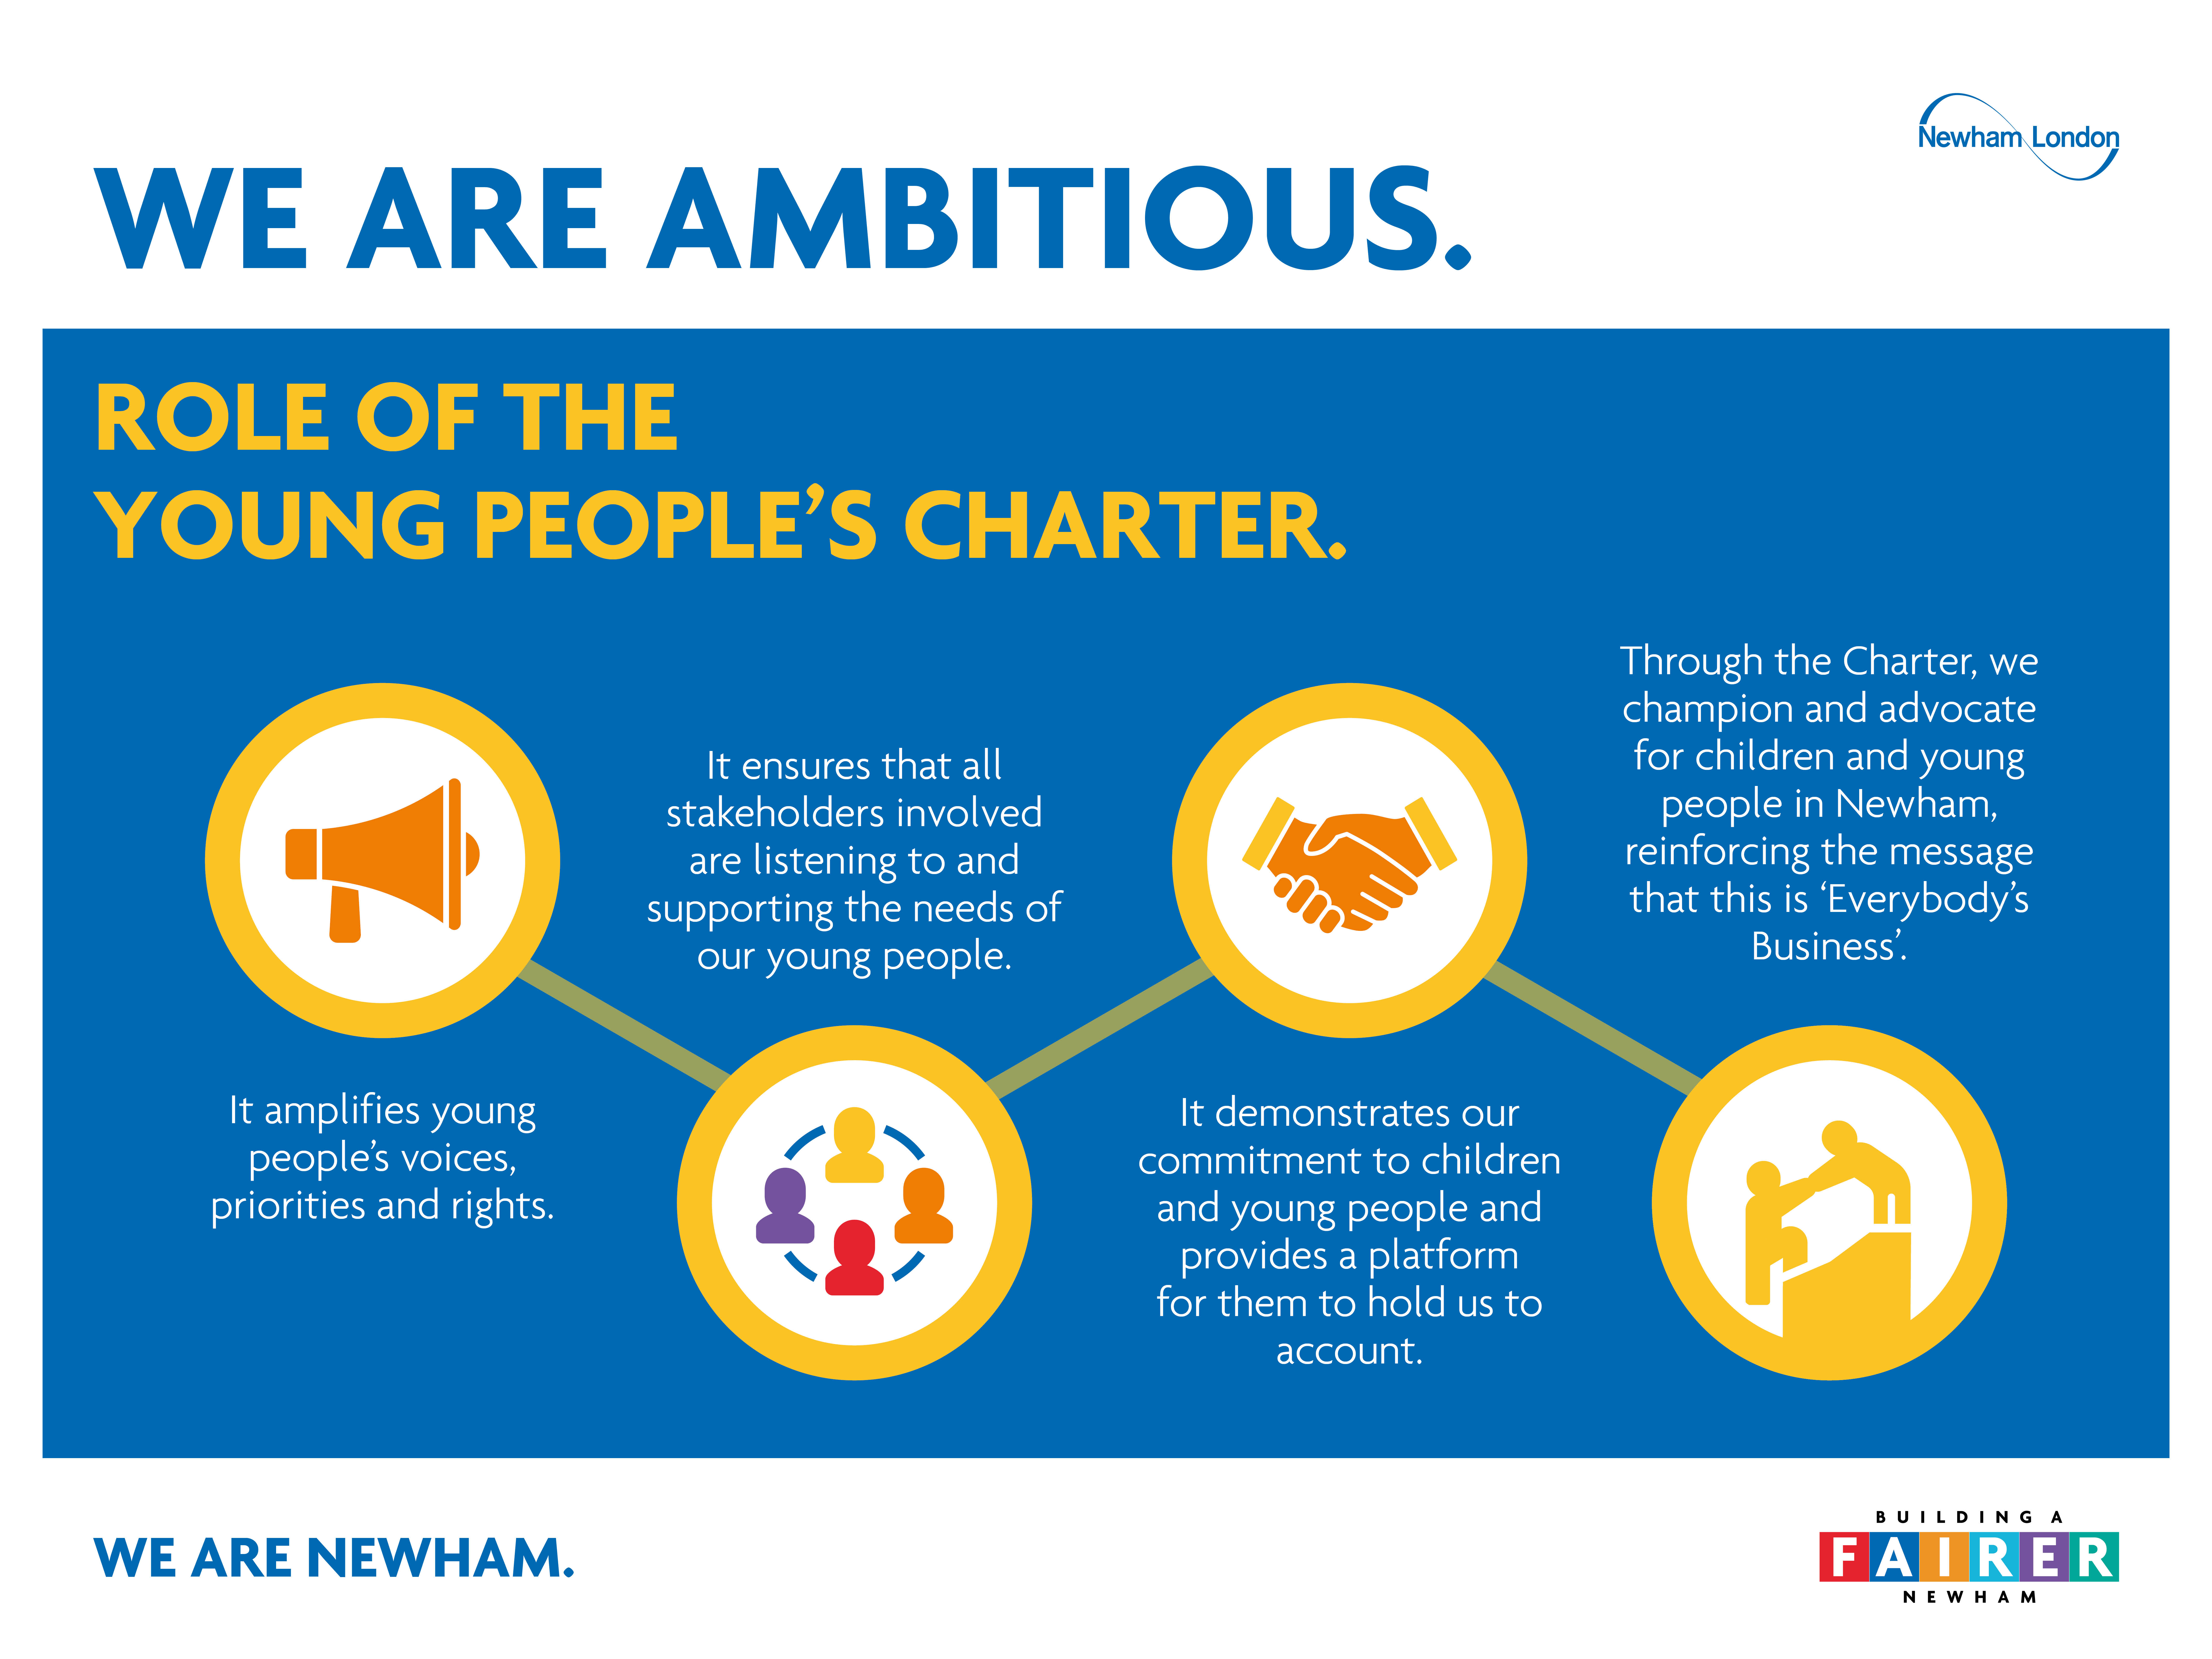 3Role of the young people s charter